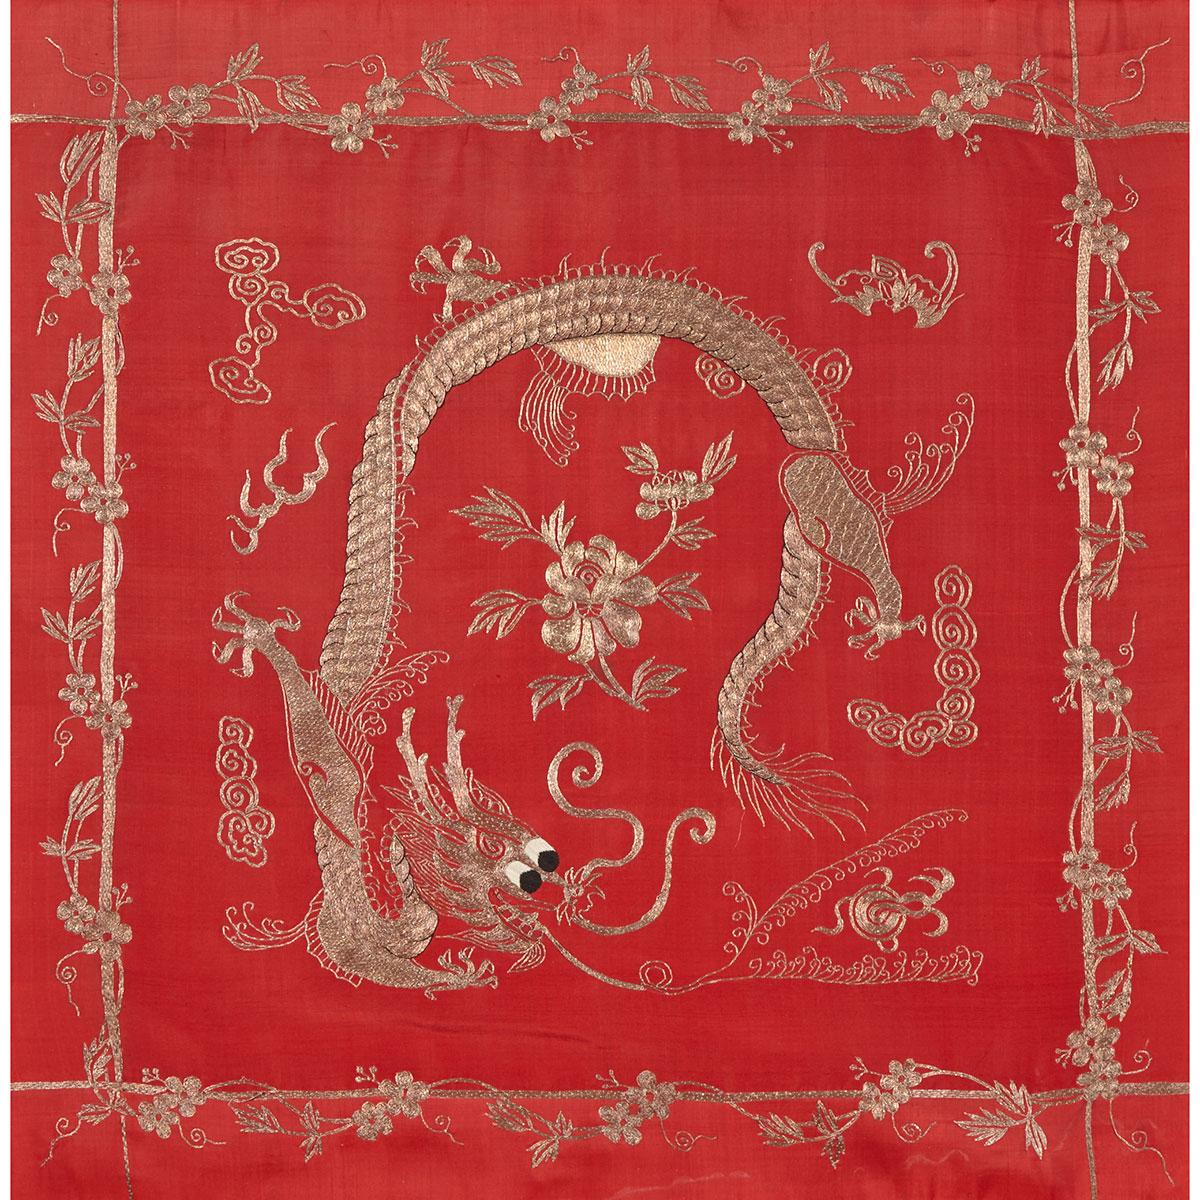 Silk Embroidered Red Ground Dragon Panel, Early to Mid 20th Century